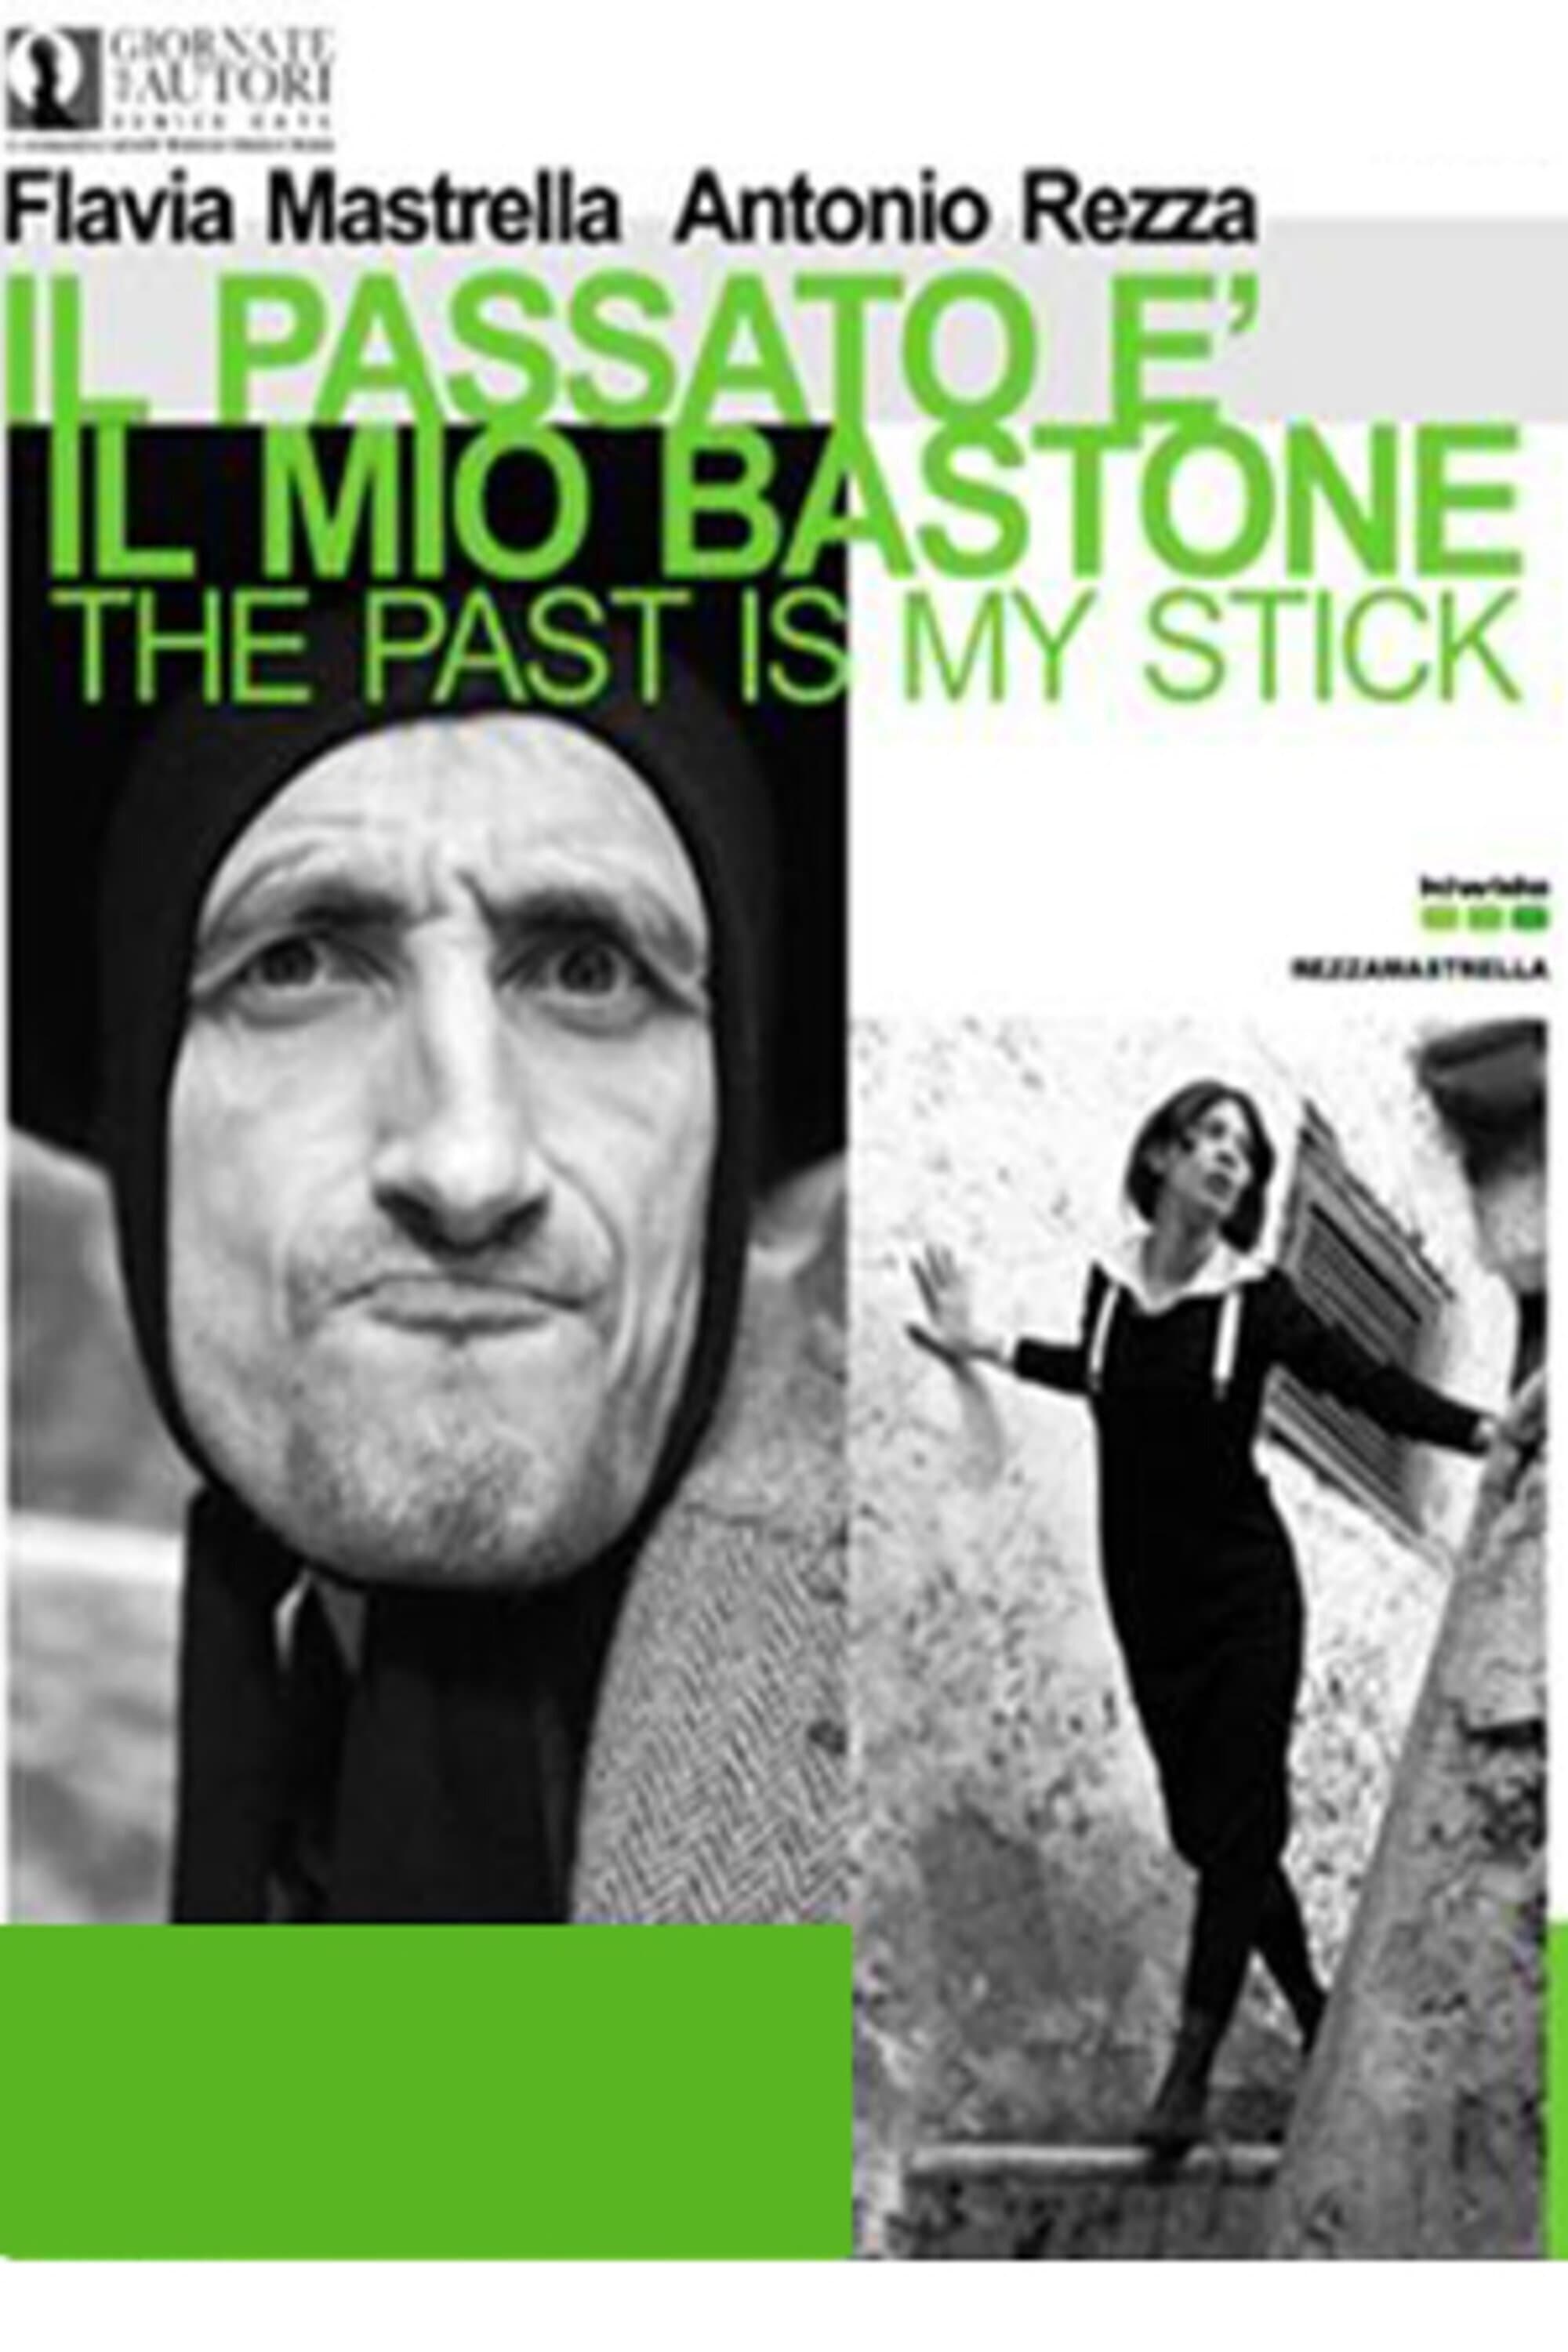 The Past is My Stick